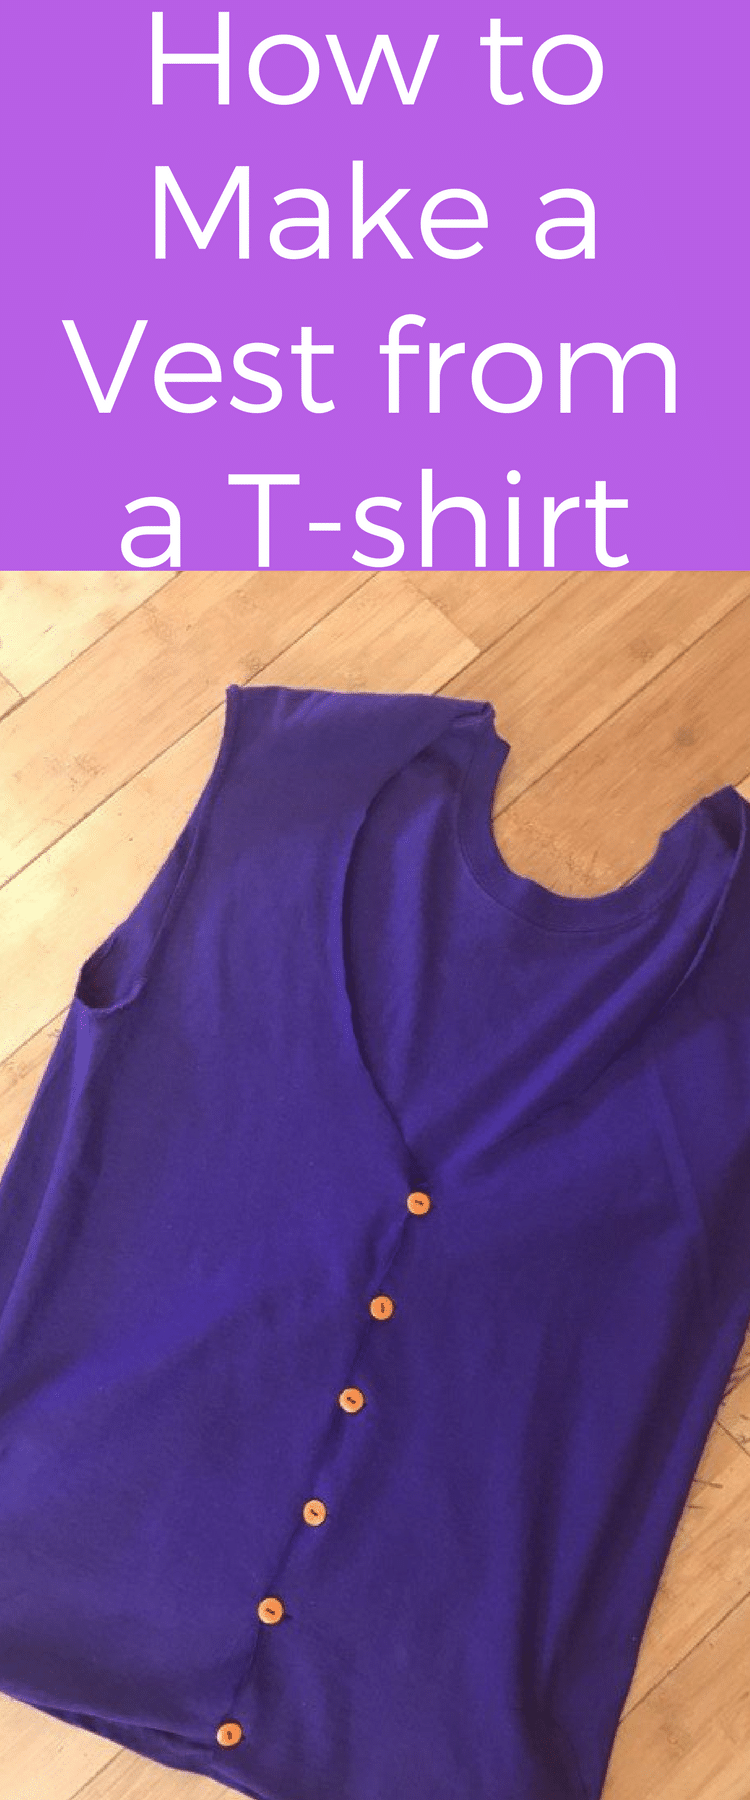 How to Make a Vest from a T-shirt #DIY #Tutorial #sewing #costume 